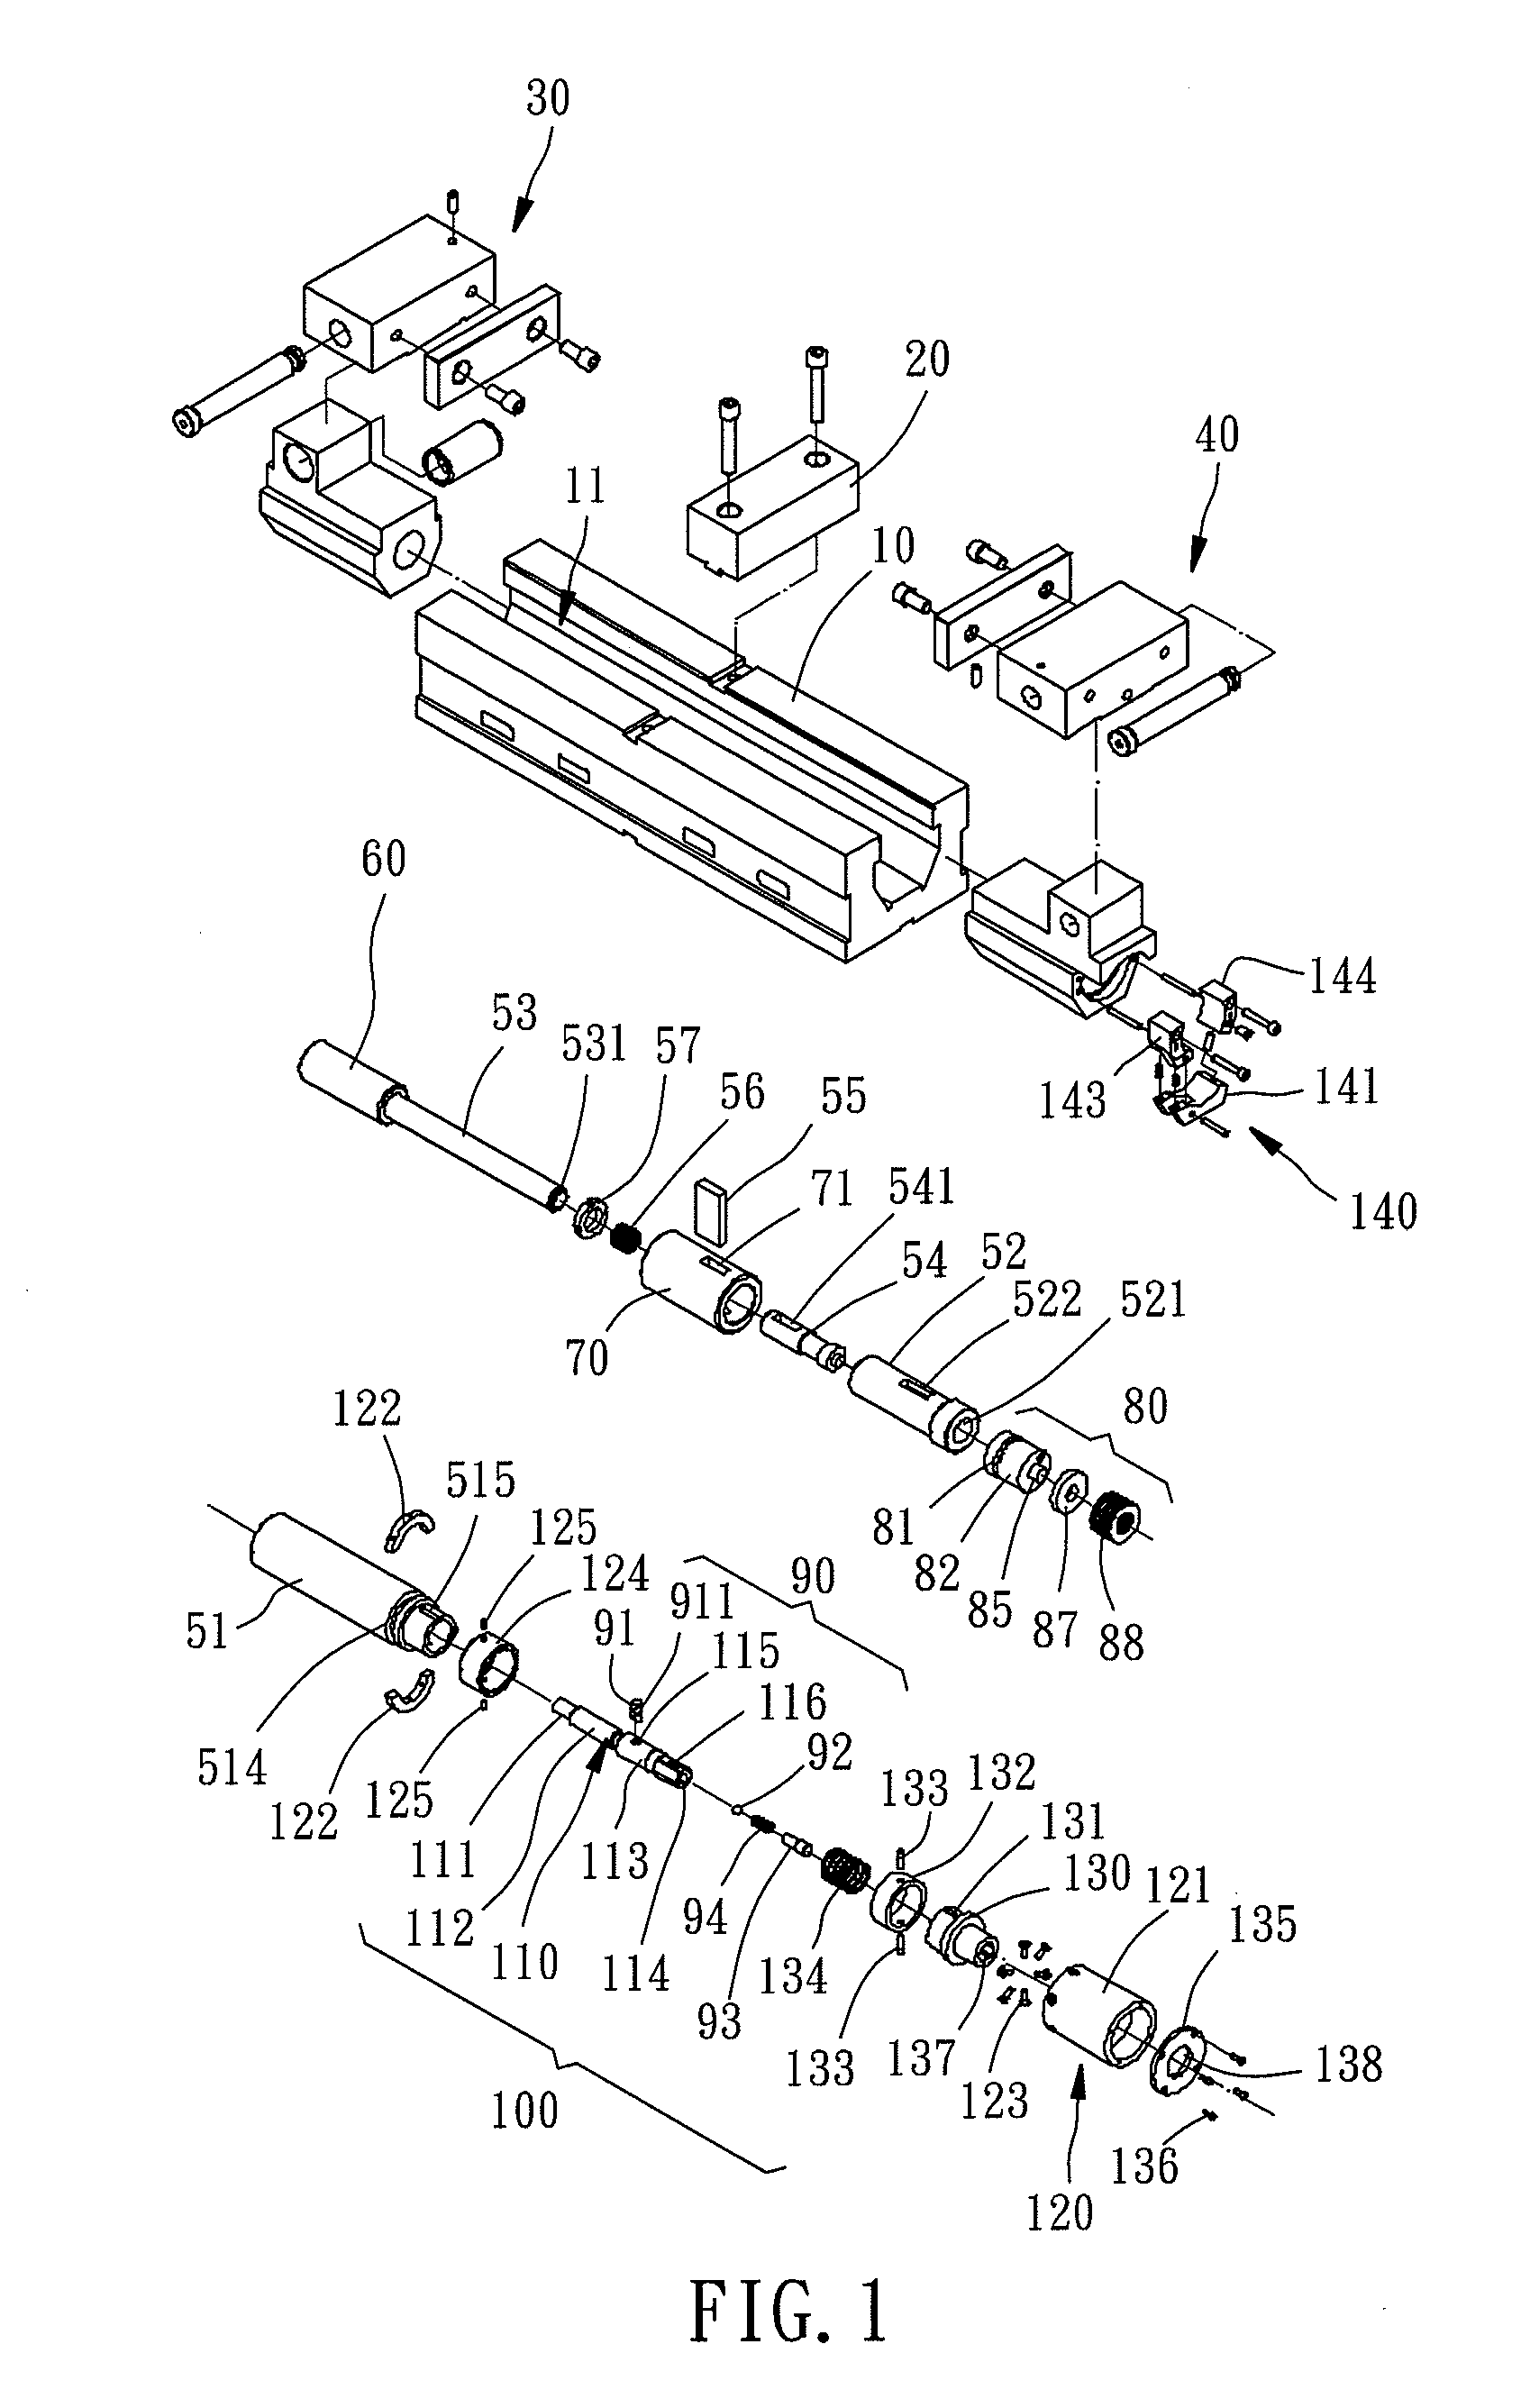 Coaxial concentric double-jaw vice